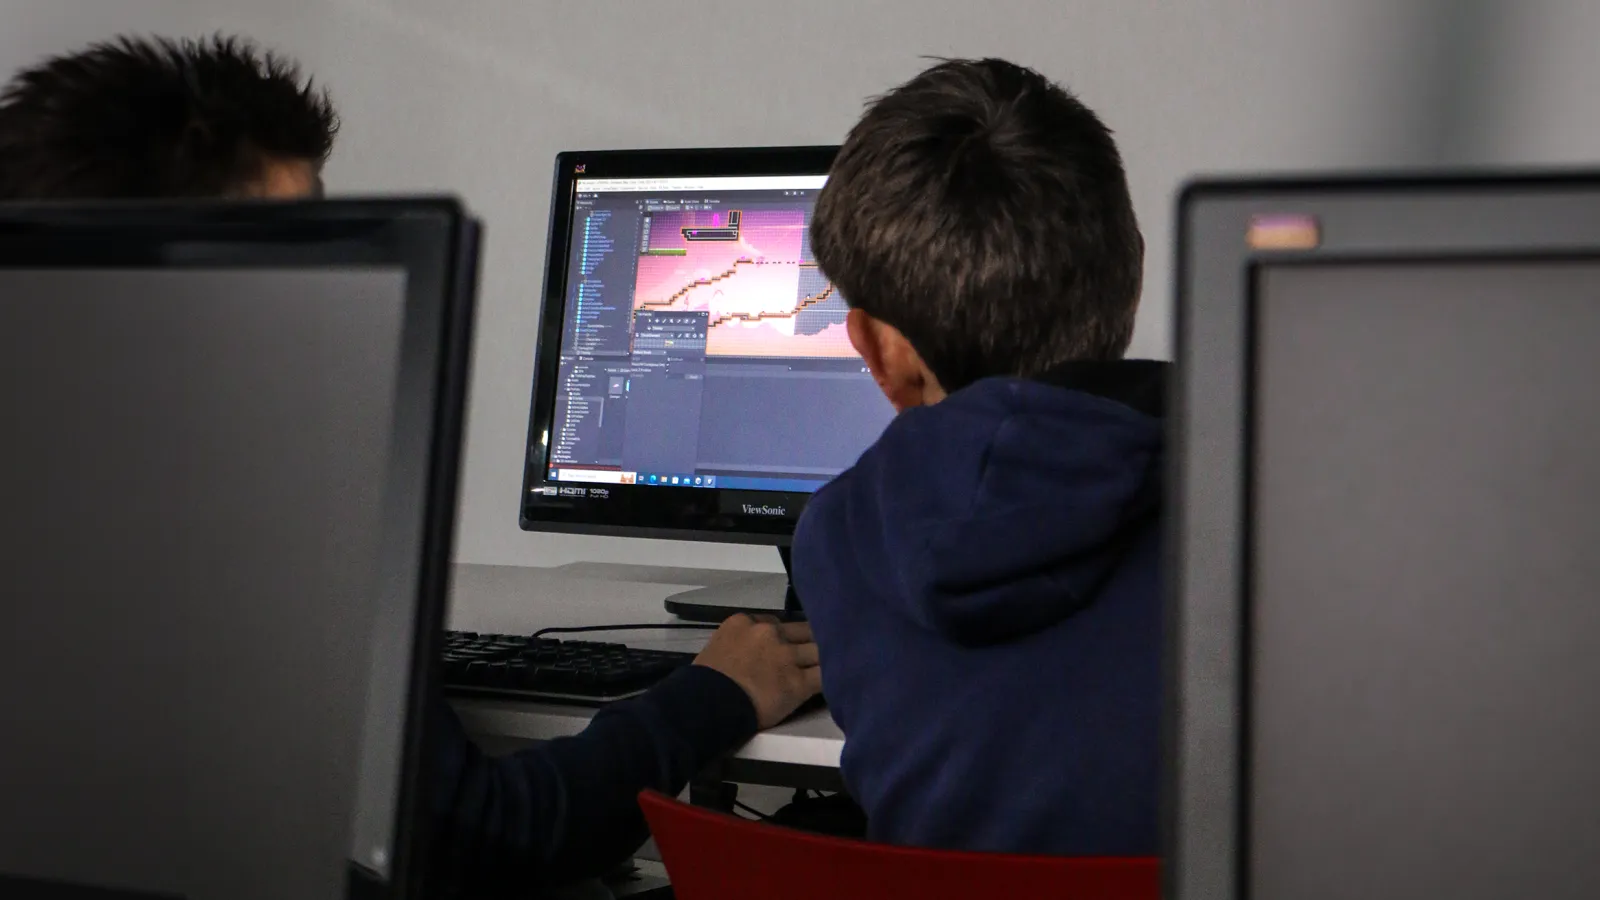 Among screens, two students work together to build their game project. The creen shows a videogame with platforms